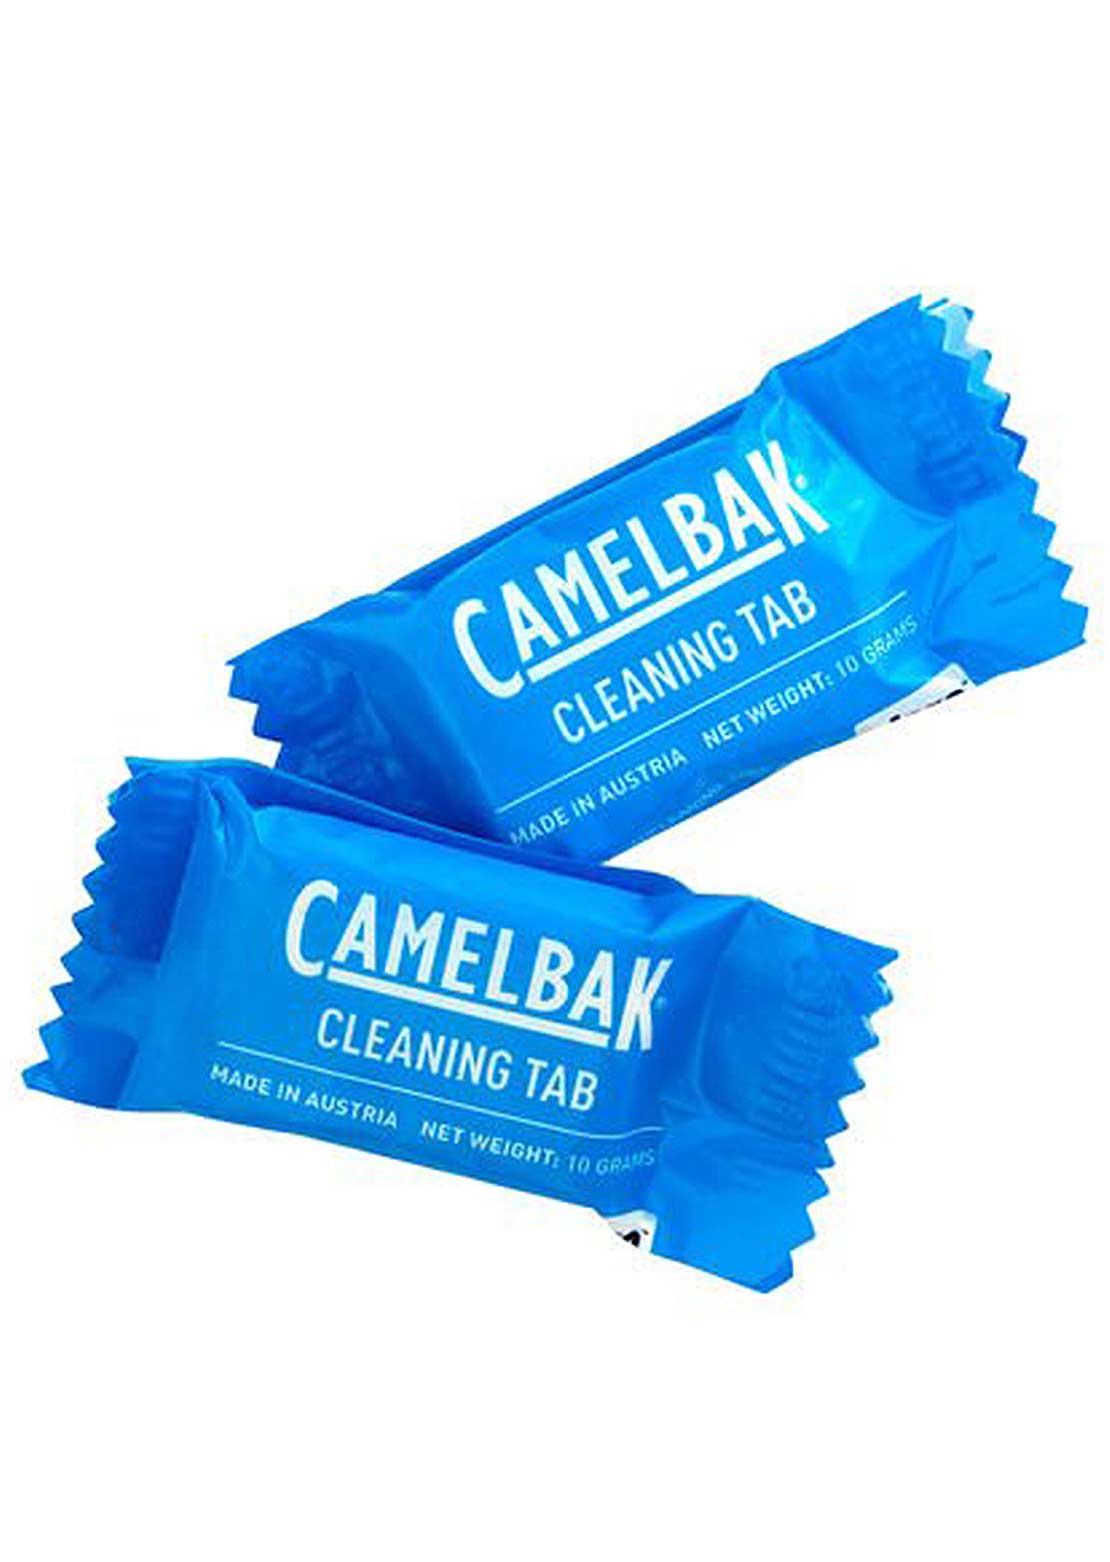 Camelback Cleaning Tablets (8 Pack)